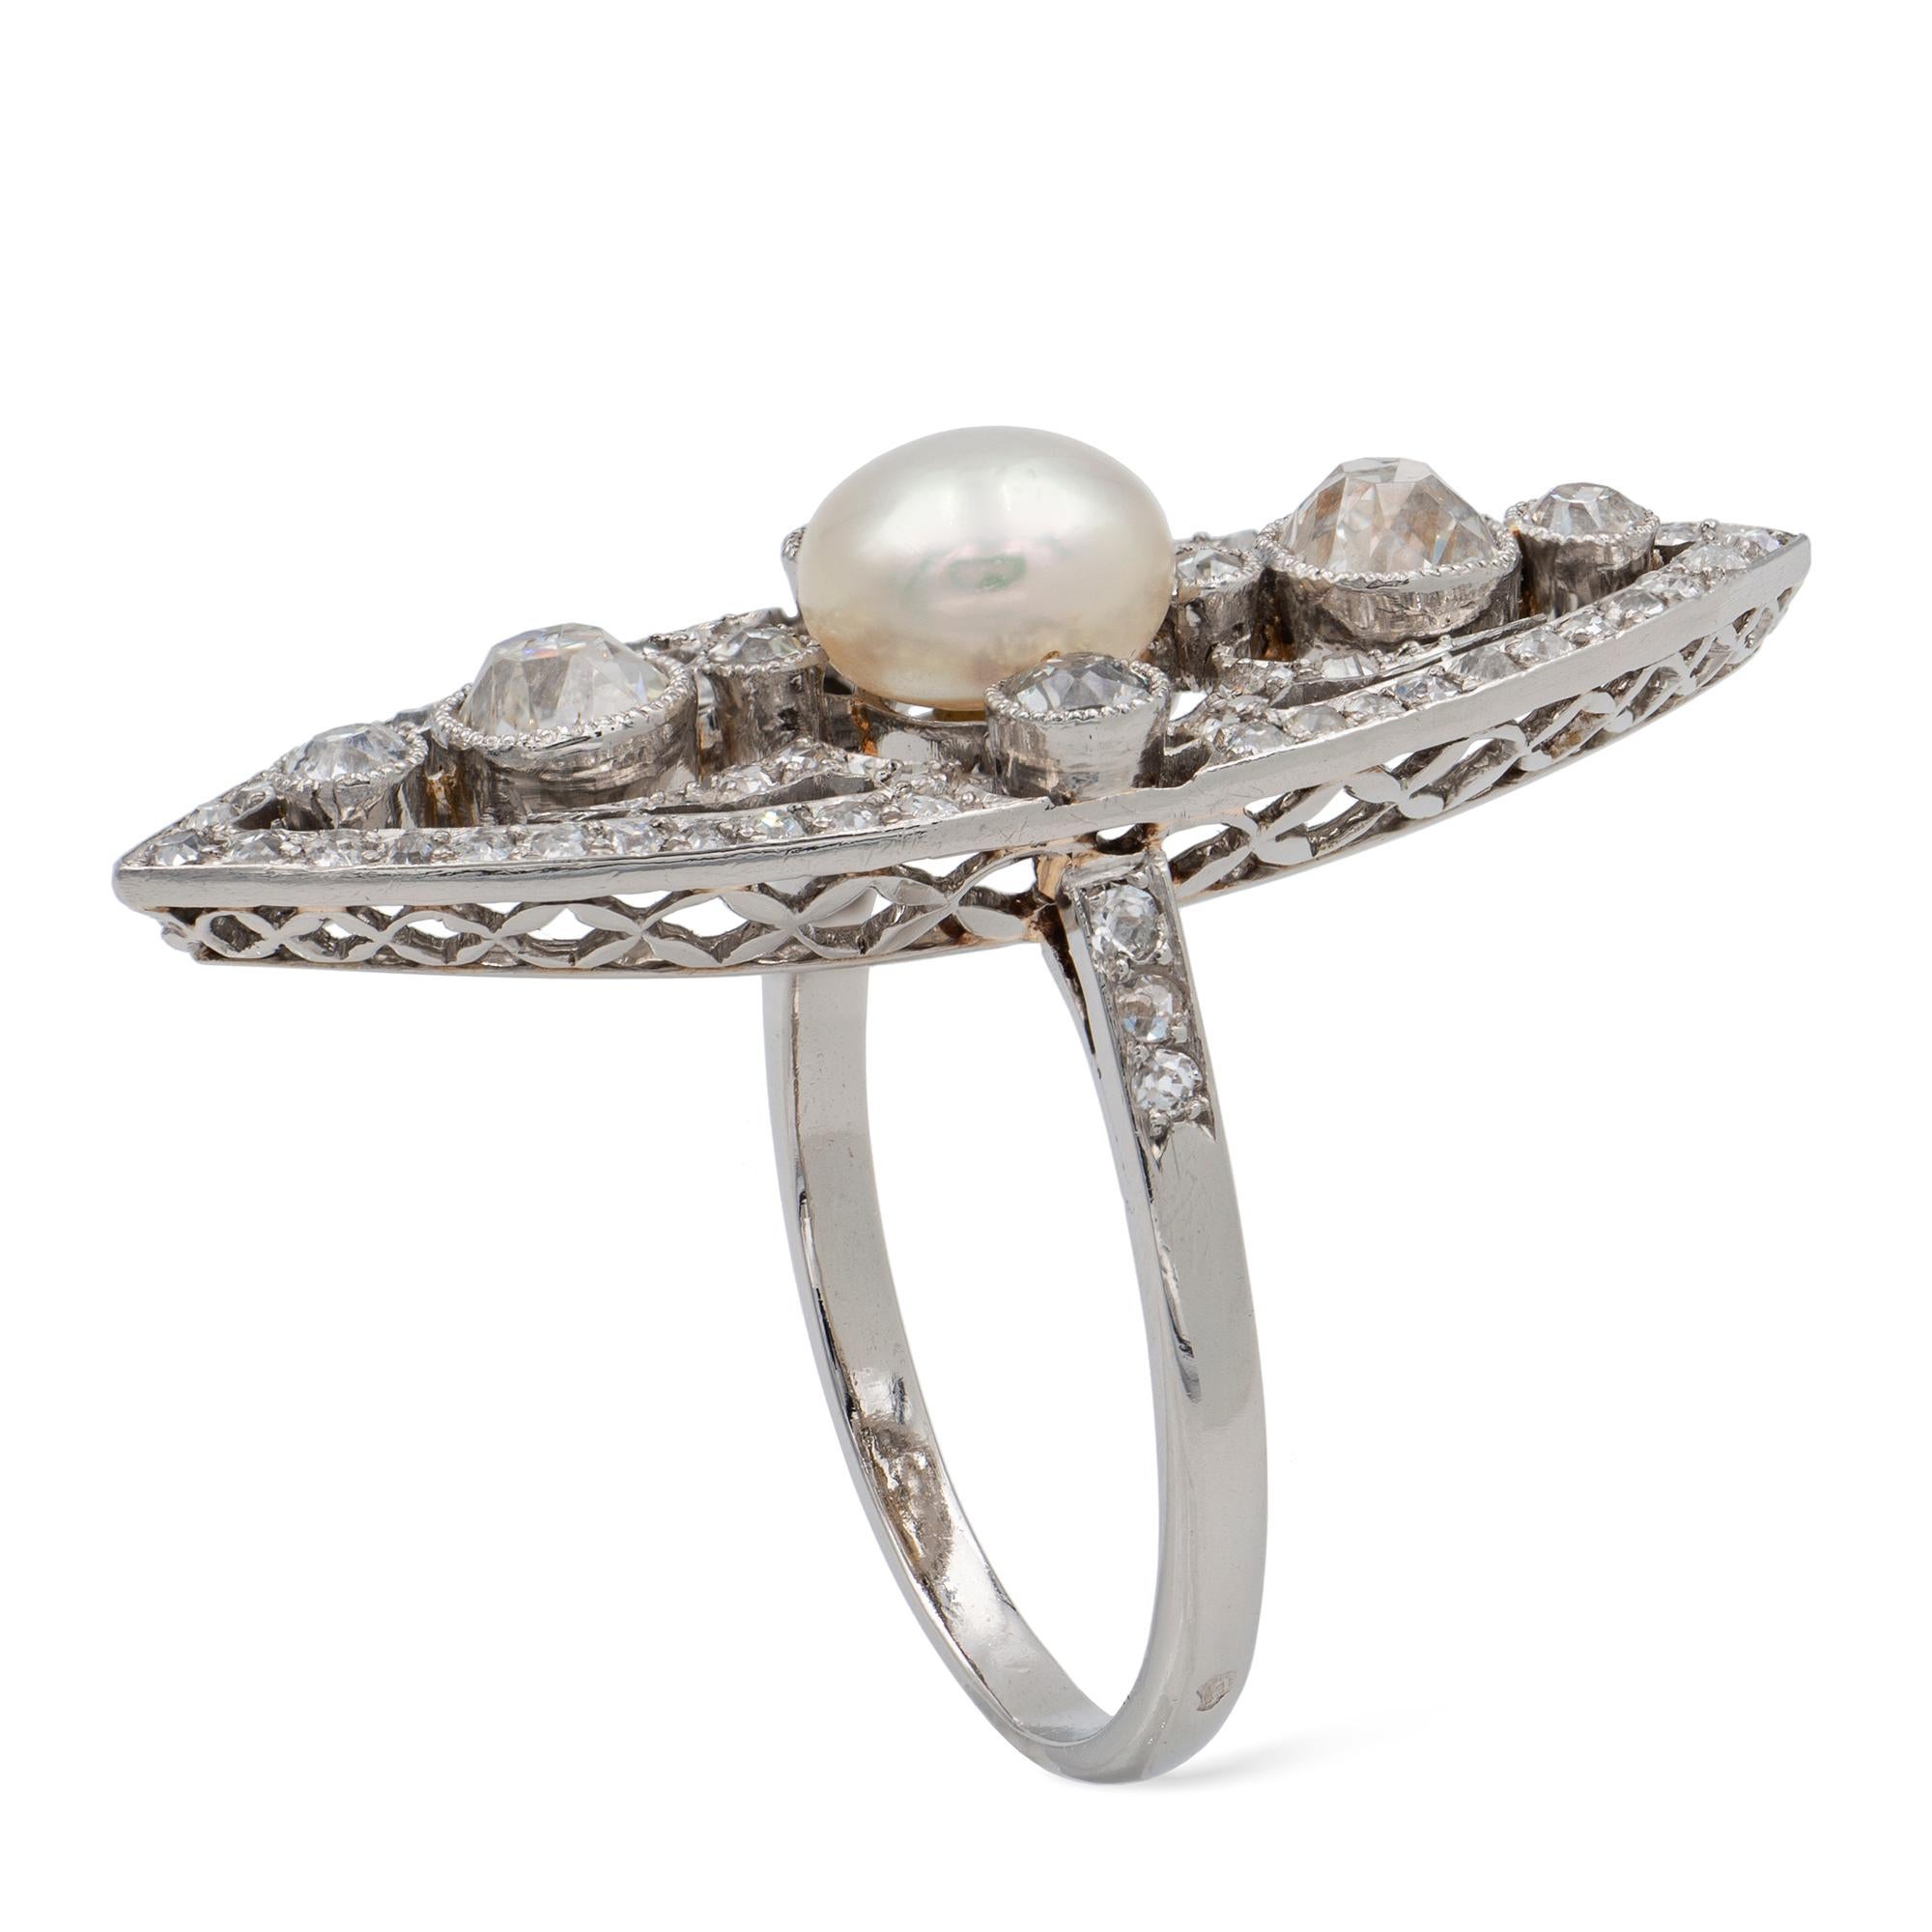 A Belle Epoque natural pearl and diamond navette-shaped ring, the pearl measuring 6.9-7.0 x 4.8mm accompanied by GCS Report stating to be natural of saltwater origin, centrally-set to an openwork old-cut diamond-set plaque, to pierced gallery and